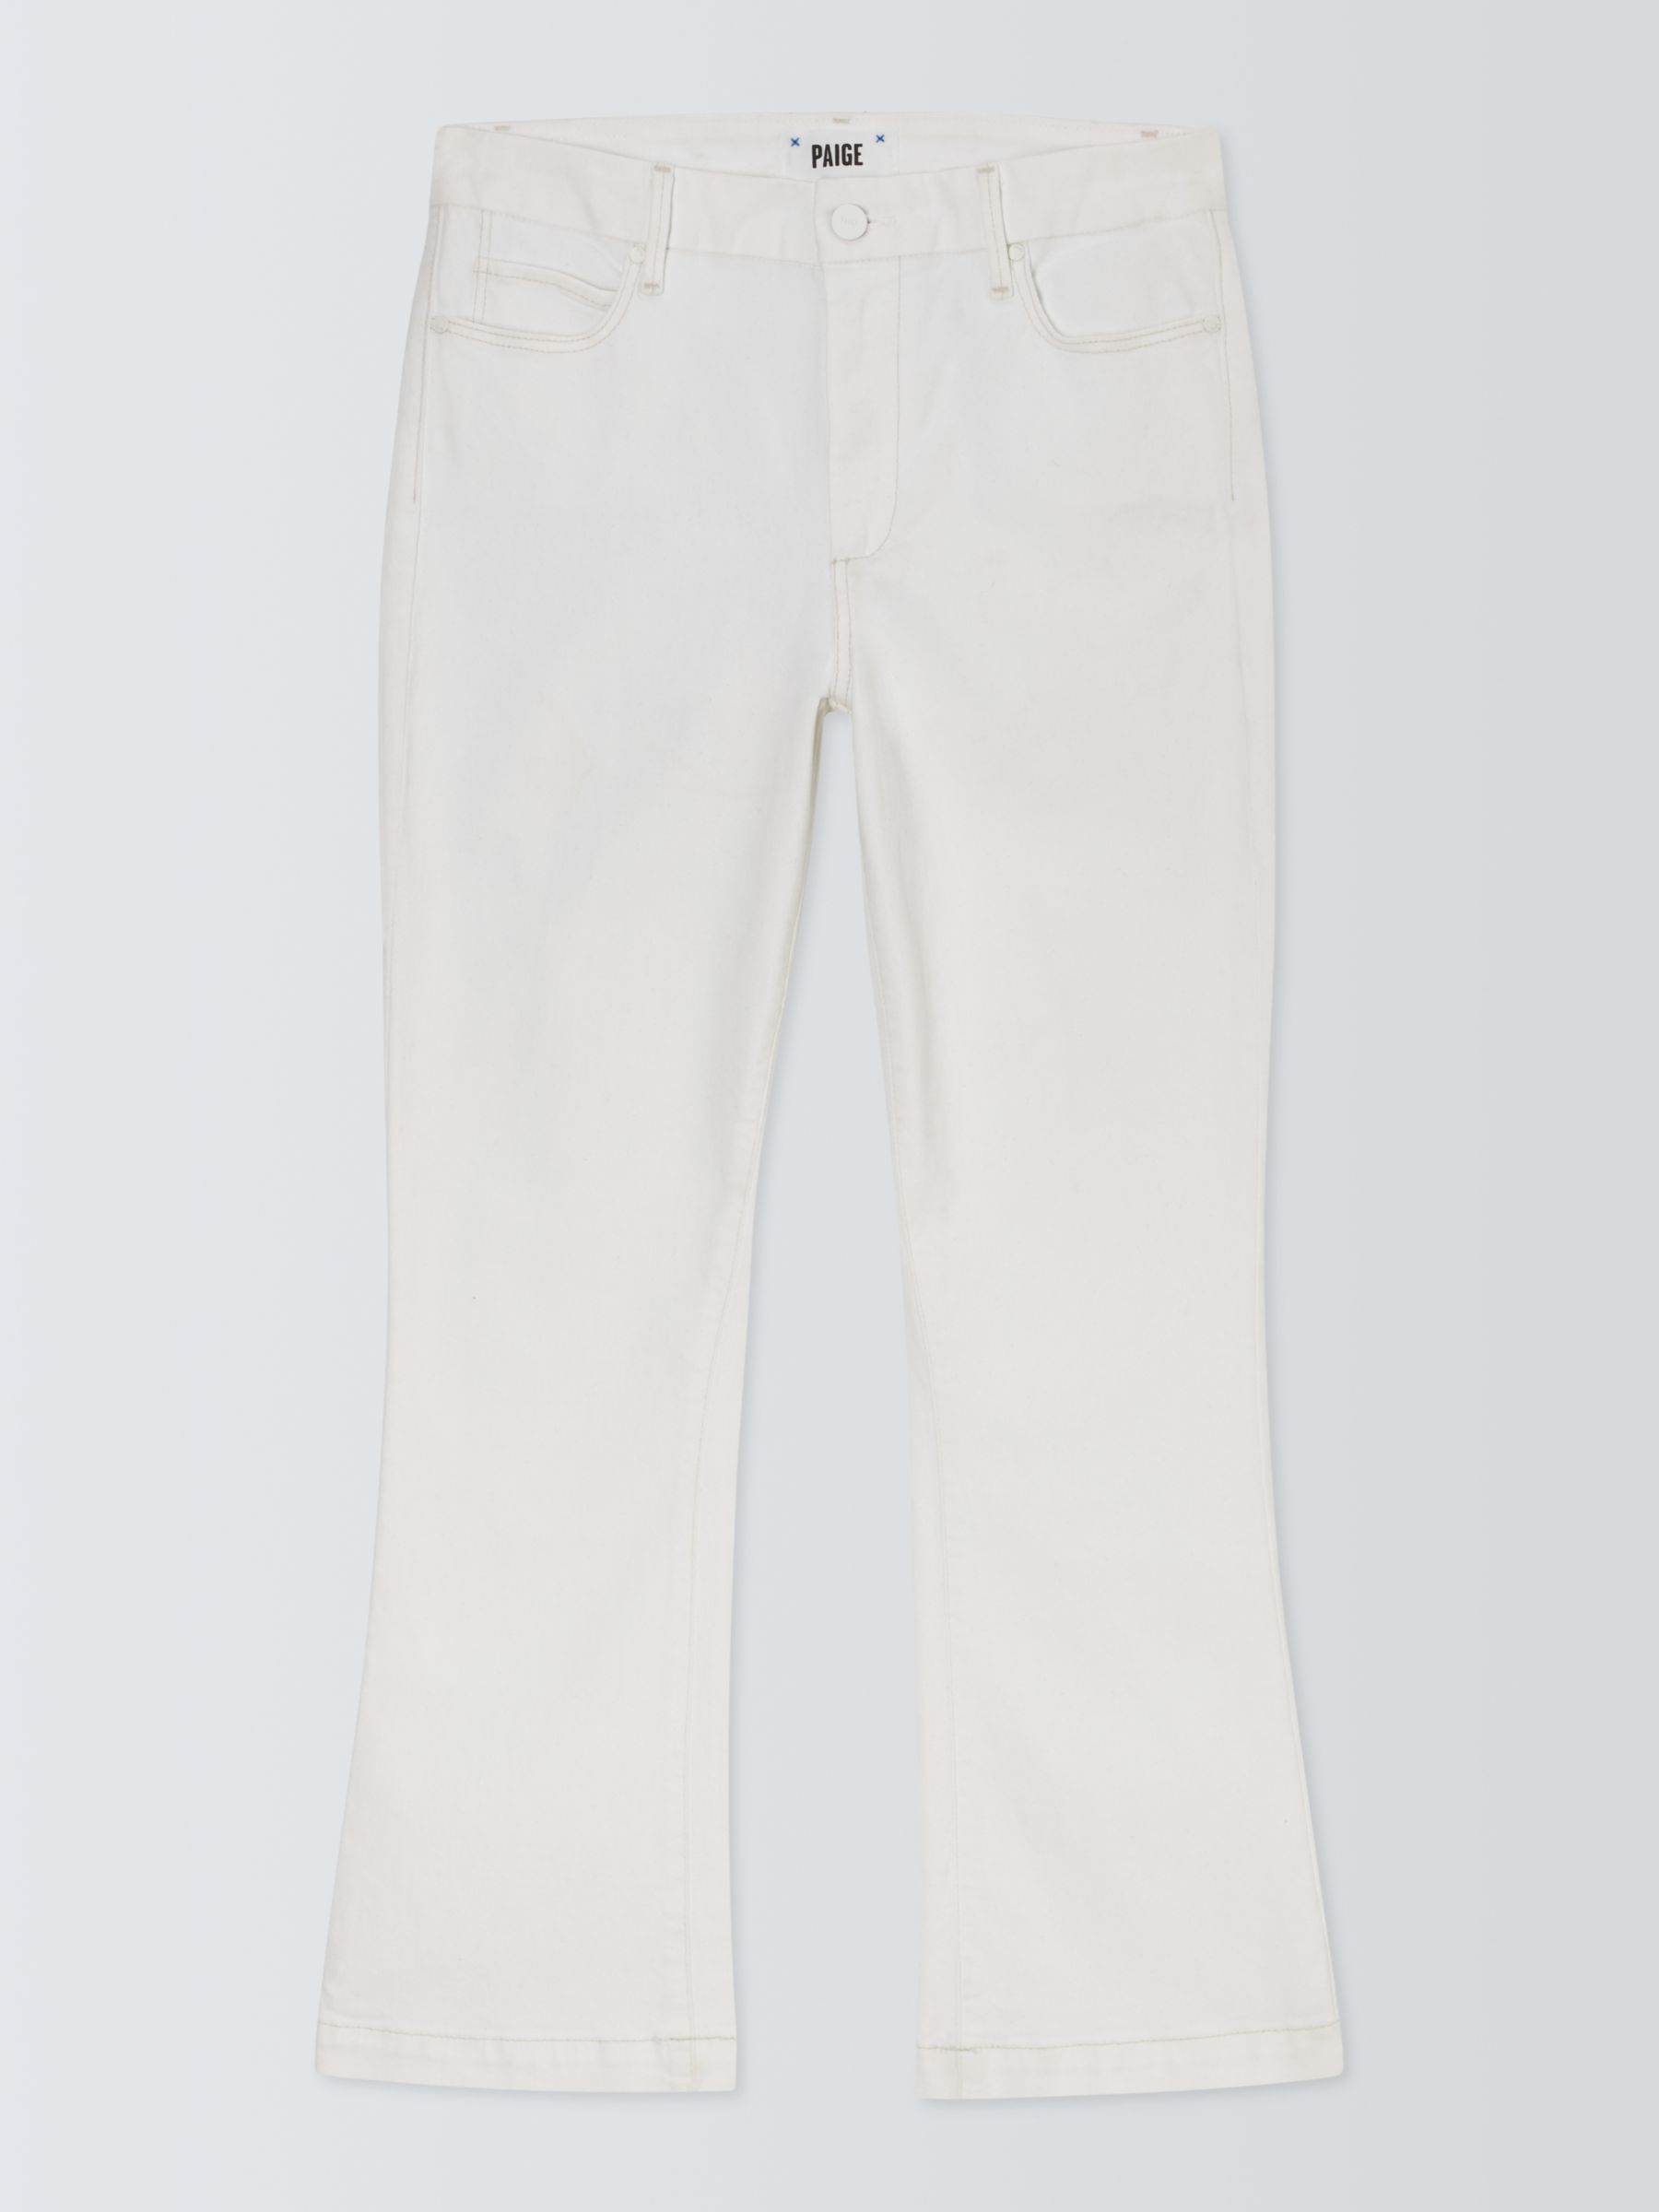 PAIGE Colette Cropped Flared Jeans, Crisp White, 24